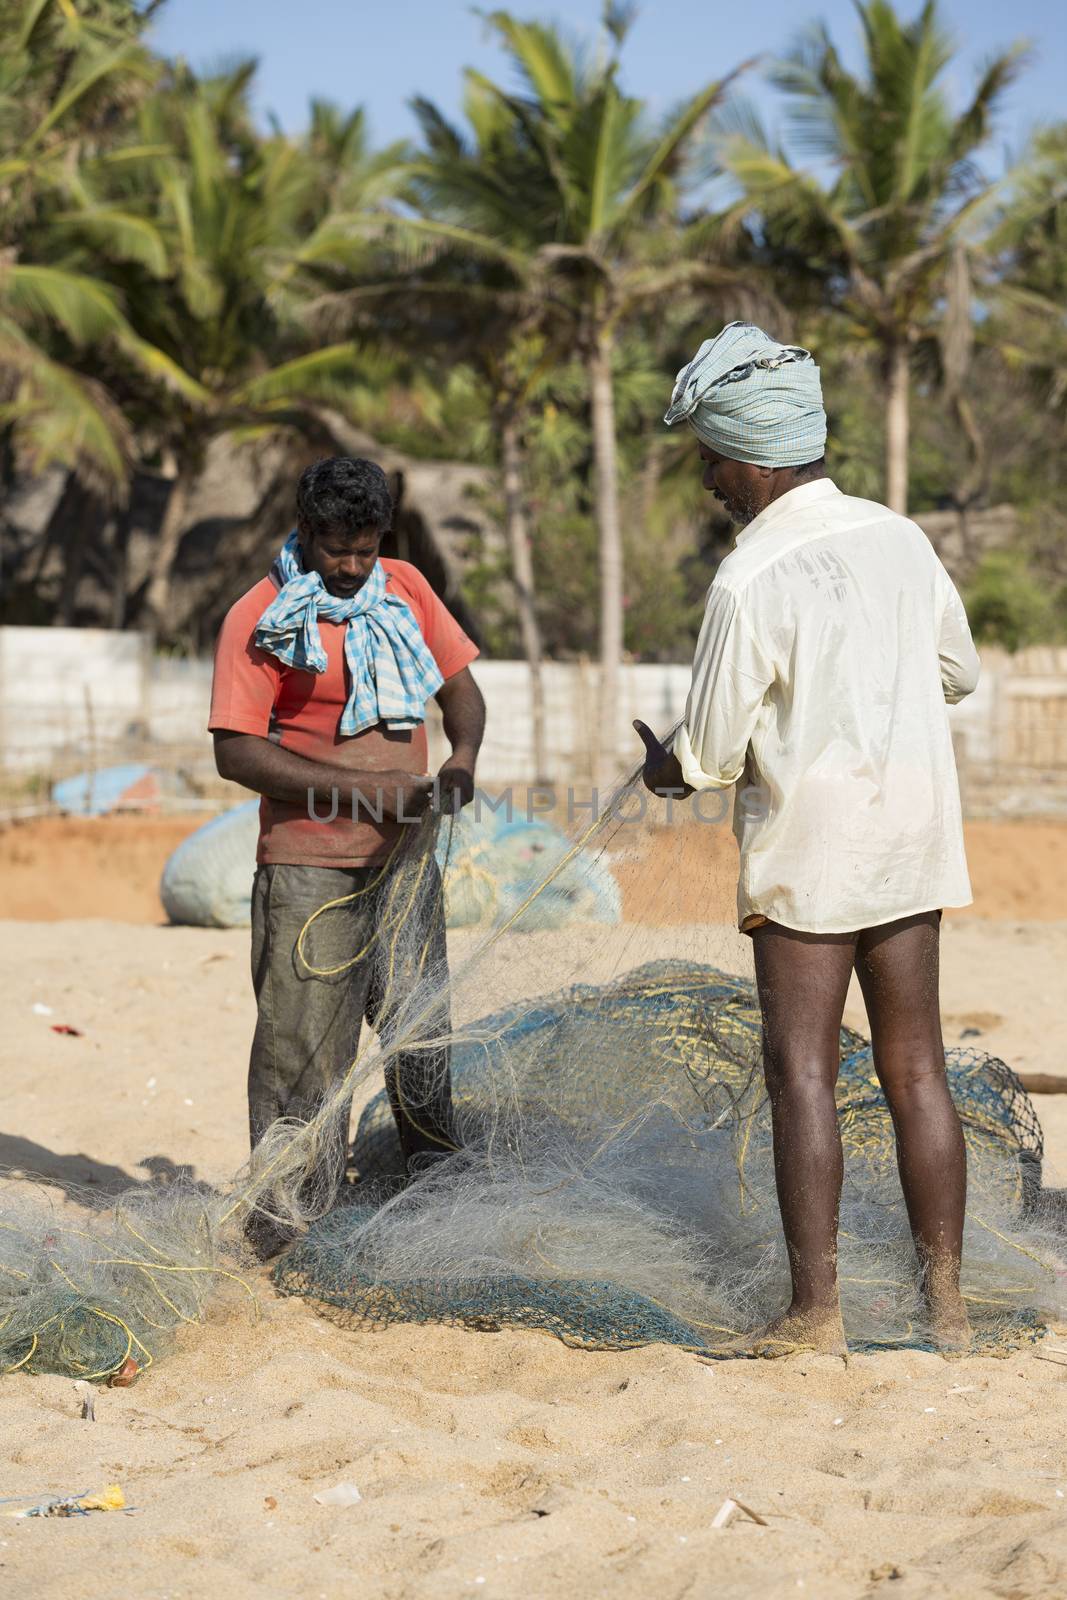 Documentary images : Fishermen at Pondichery, India by CatherineL-Prod